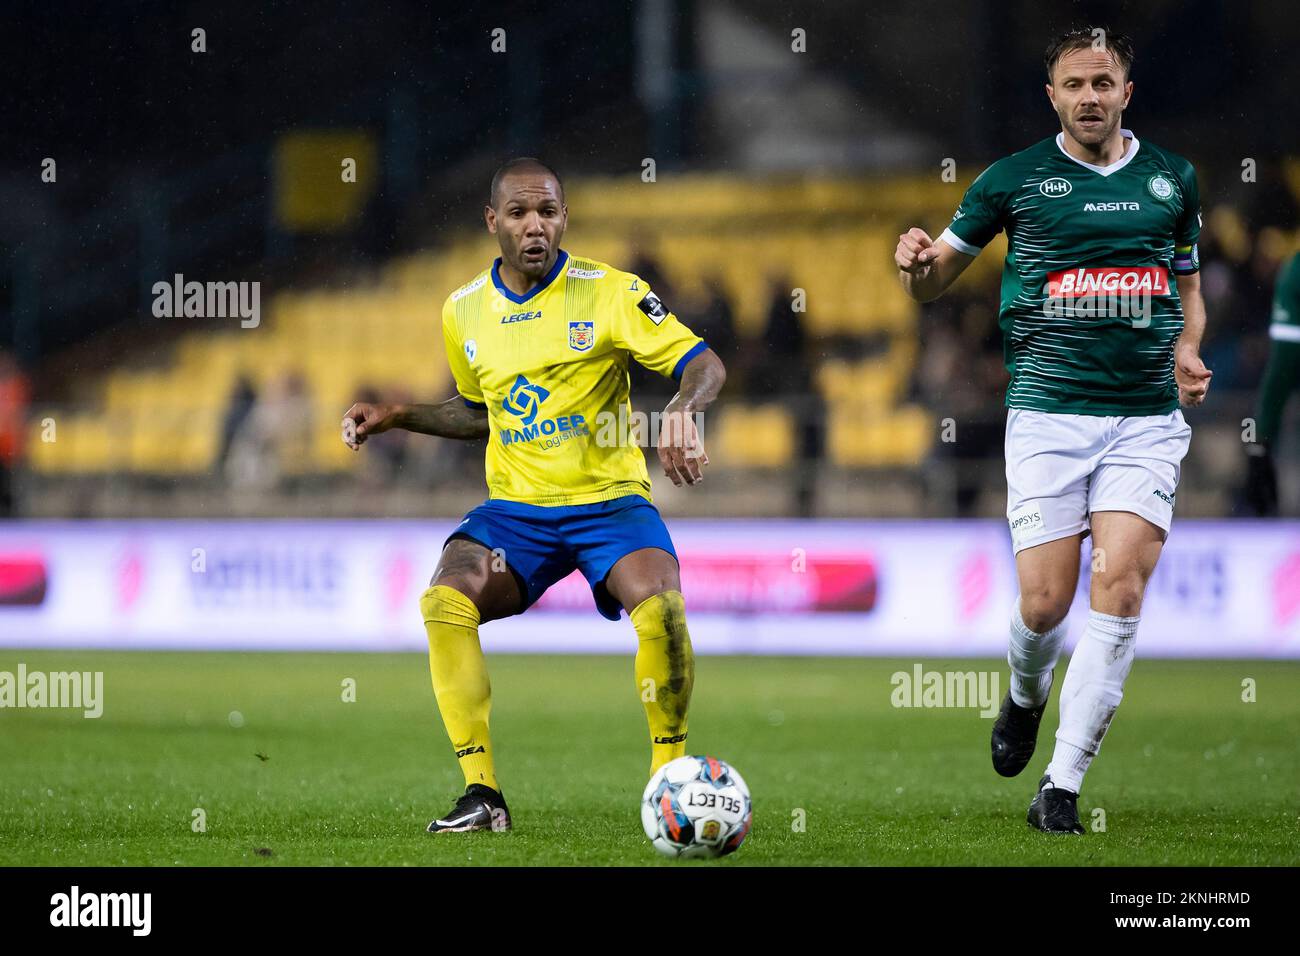 Beveren's Luiz Everton pictured in action during a soccer match between SK Beveren and Lommel SK, Sunday 27 November 2022 in Beveren-Waas, on day 15 of the 2022-2023 'Challenger Pro League' 1B second division of the Belgian championship. BELGA PHOTO KRISTOF VAN ACCOM Stock Photo